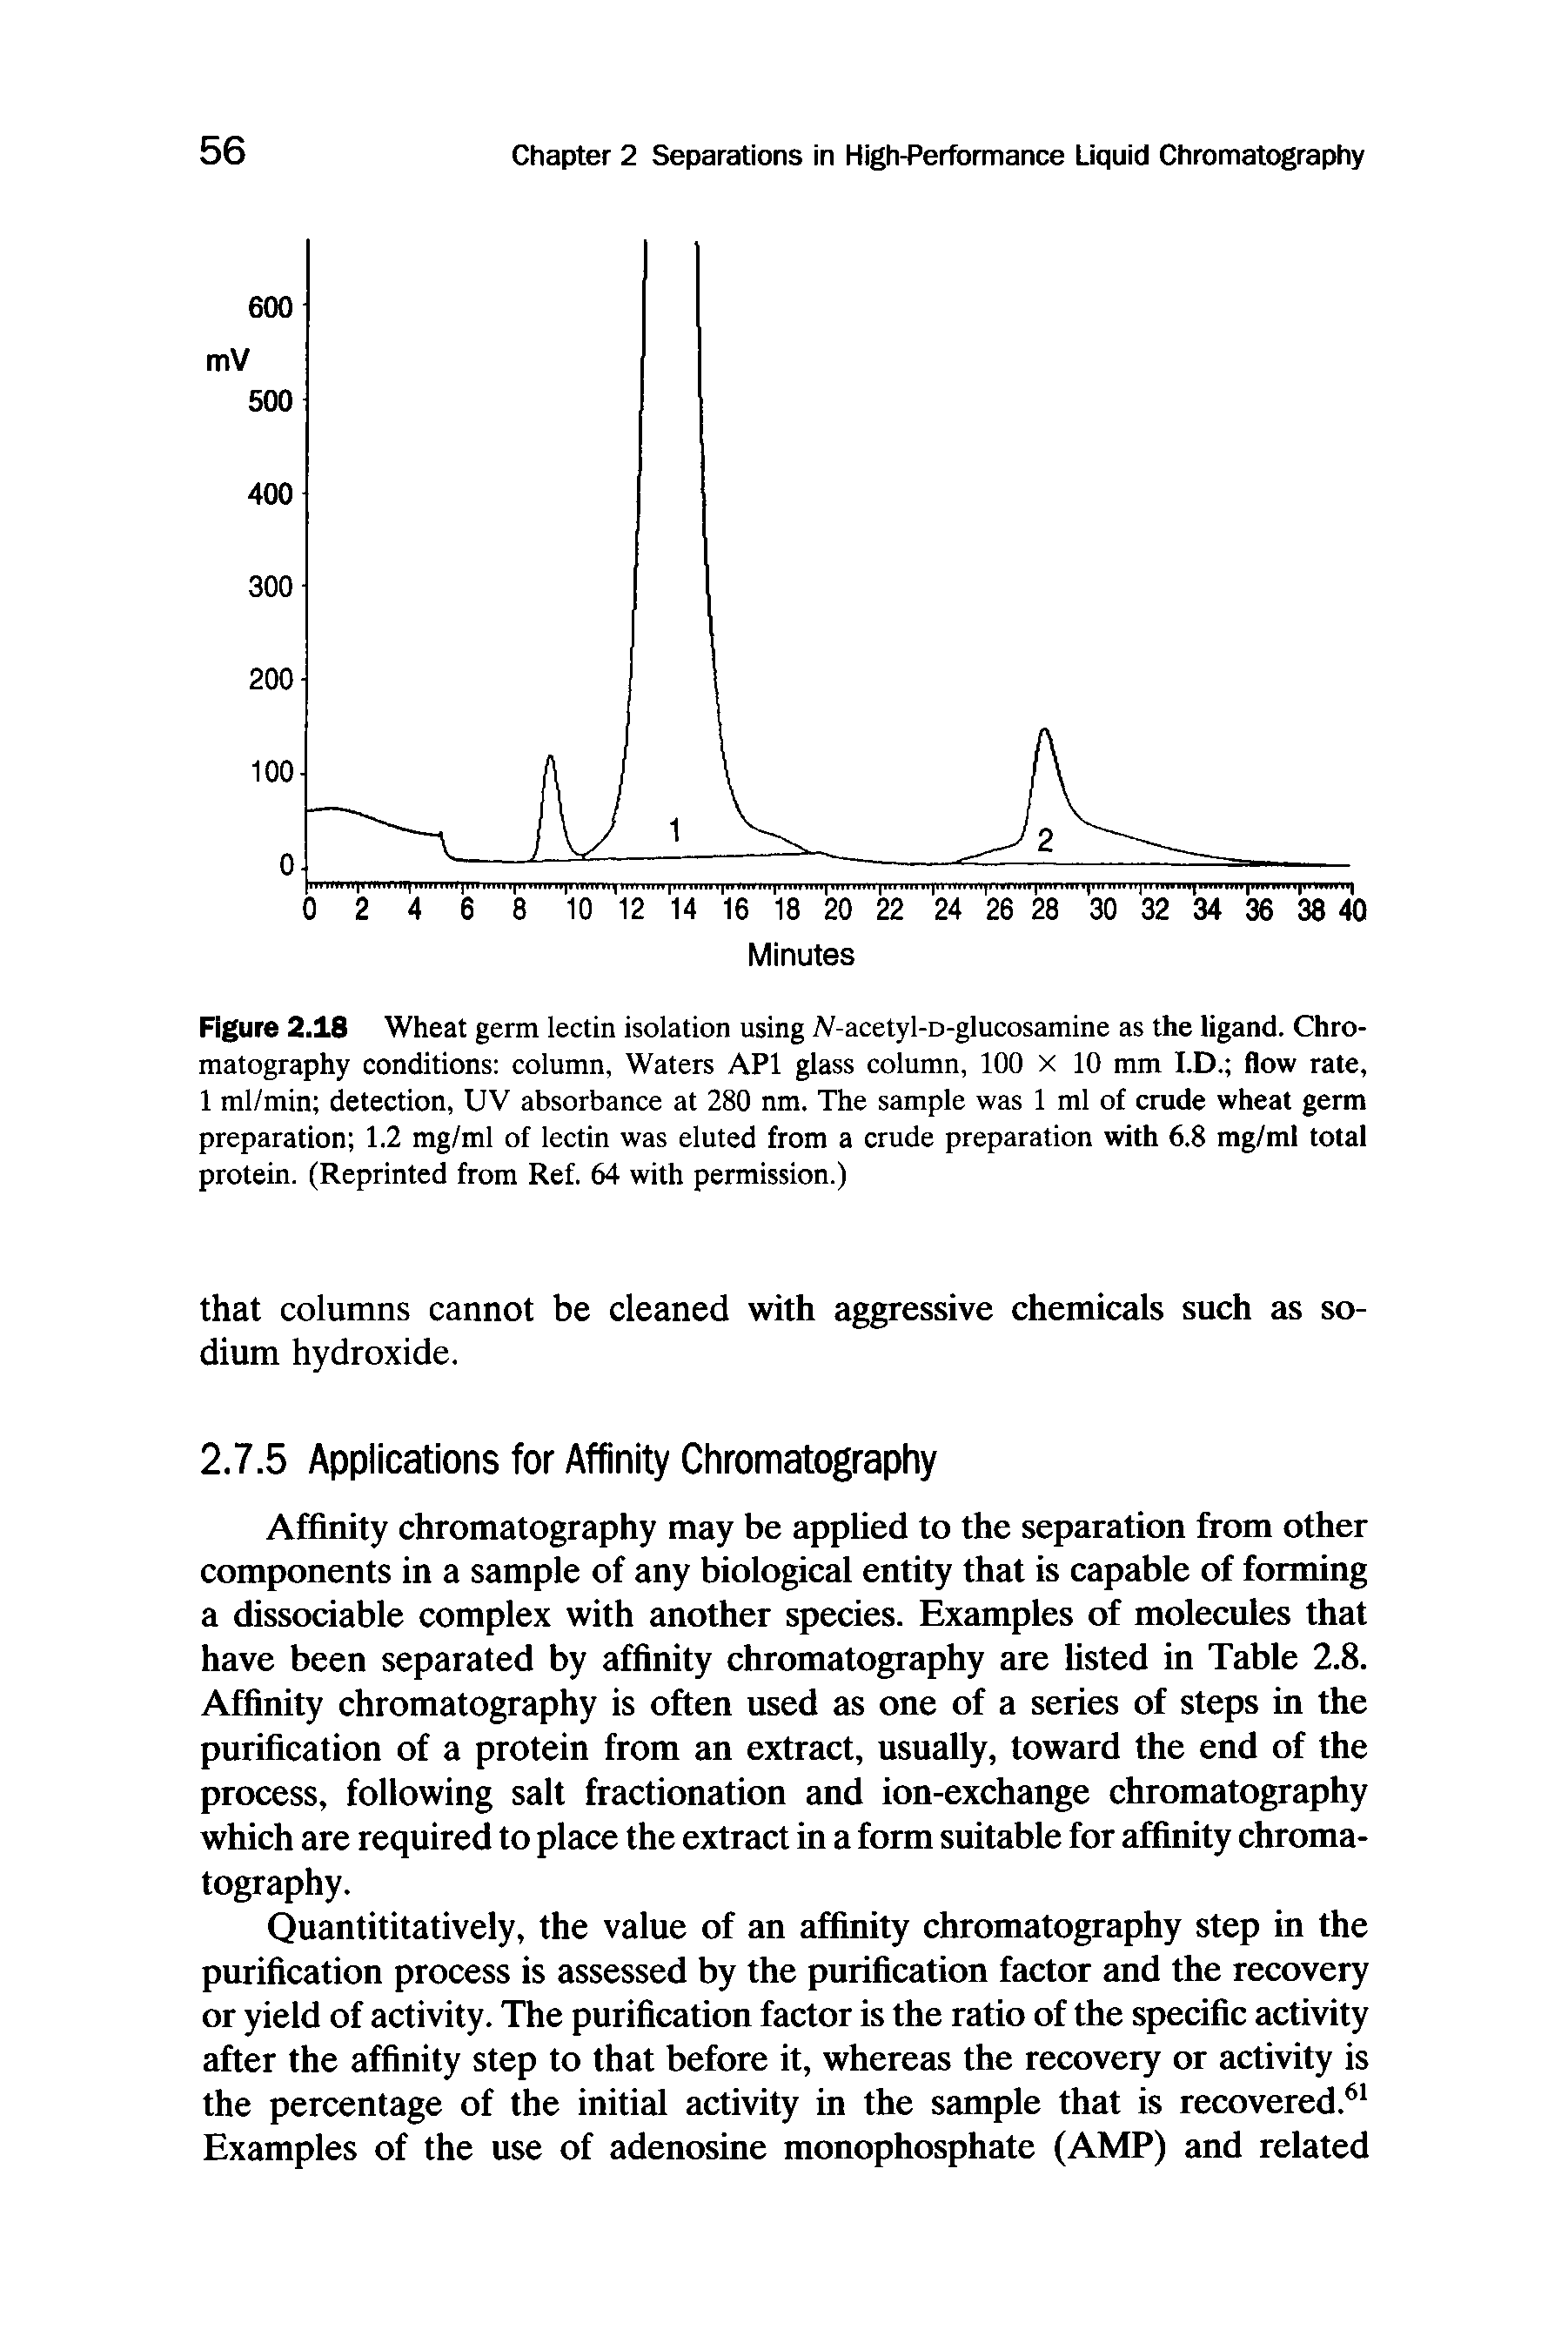 Figure 2.18 Wheat germ lectin isolation using A -acetyl-o-glucosamine as the ligand. Chromatography conditions column, Waters API glass column, 100 x 10 mm I.D. flow rate, 1 ml/min detection, UV absorbance at 280 nm. The sample was 1 ml of crude wheat germ preparation 1.2 mg/ml of lectin was eluted from a crude preparation with 6.8 mg/ml total protein. (Reprinted from Ref. 64 with permission.)...